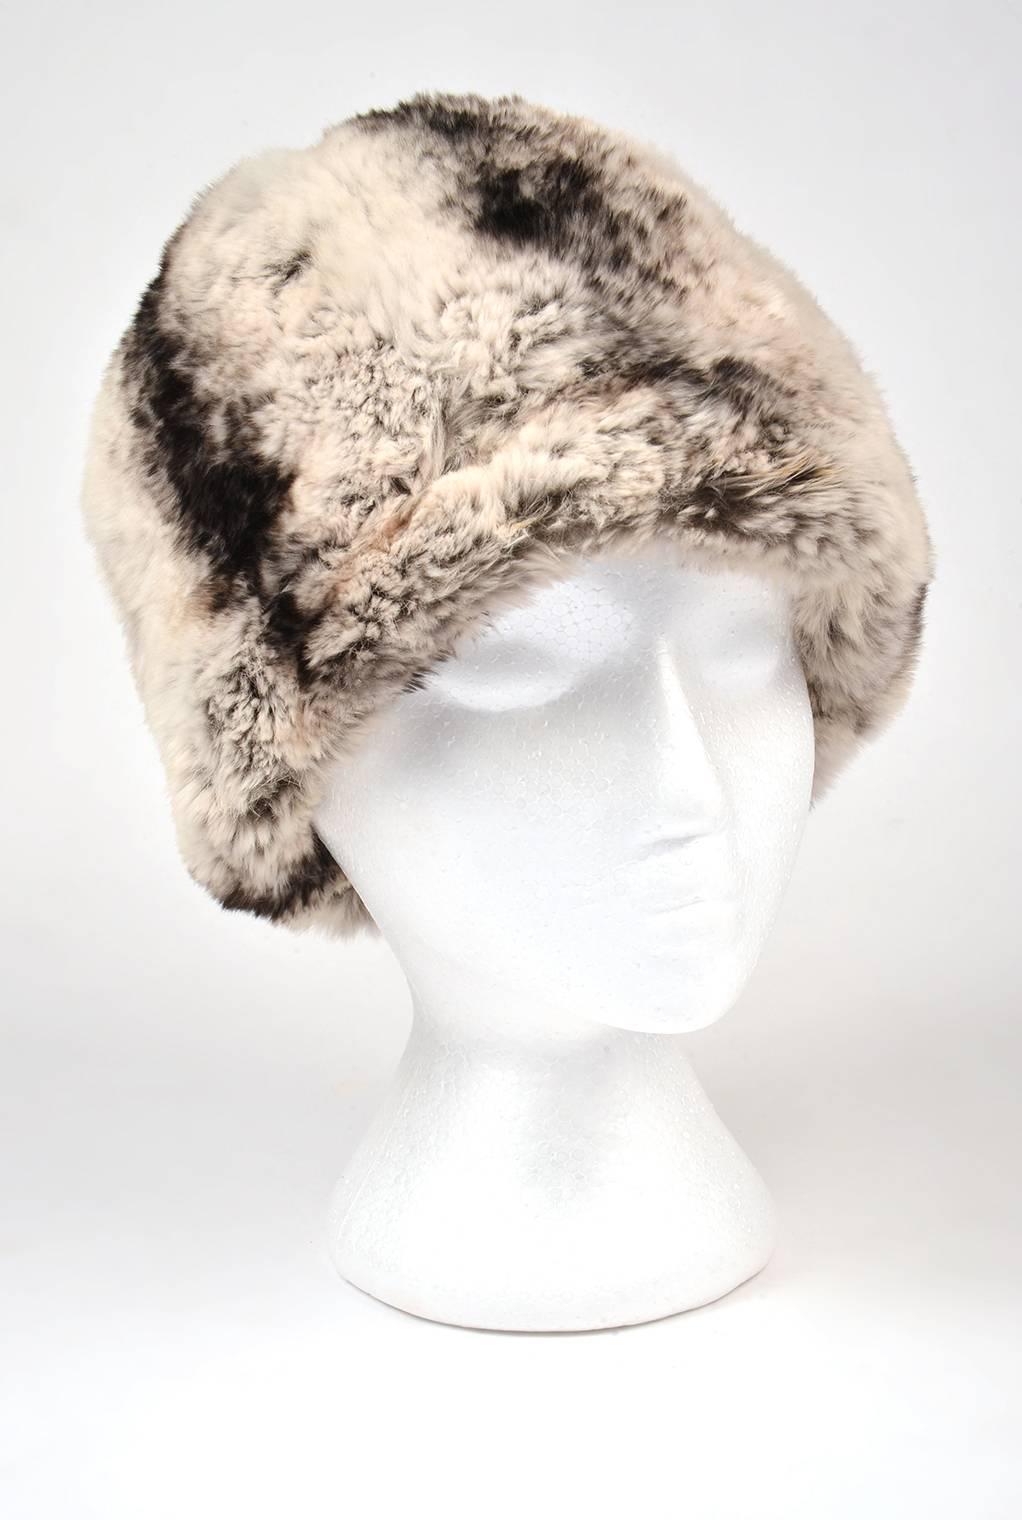 
Warm, Comfortable, and irresistibly plush. This vanilla, cream, and charcoal ink chinchilla fur hat is one that you'll love. The hat features an organic star-like shape at the top of the hat, with dark tips that extend further towards the bottom.